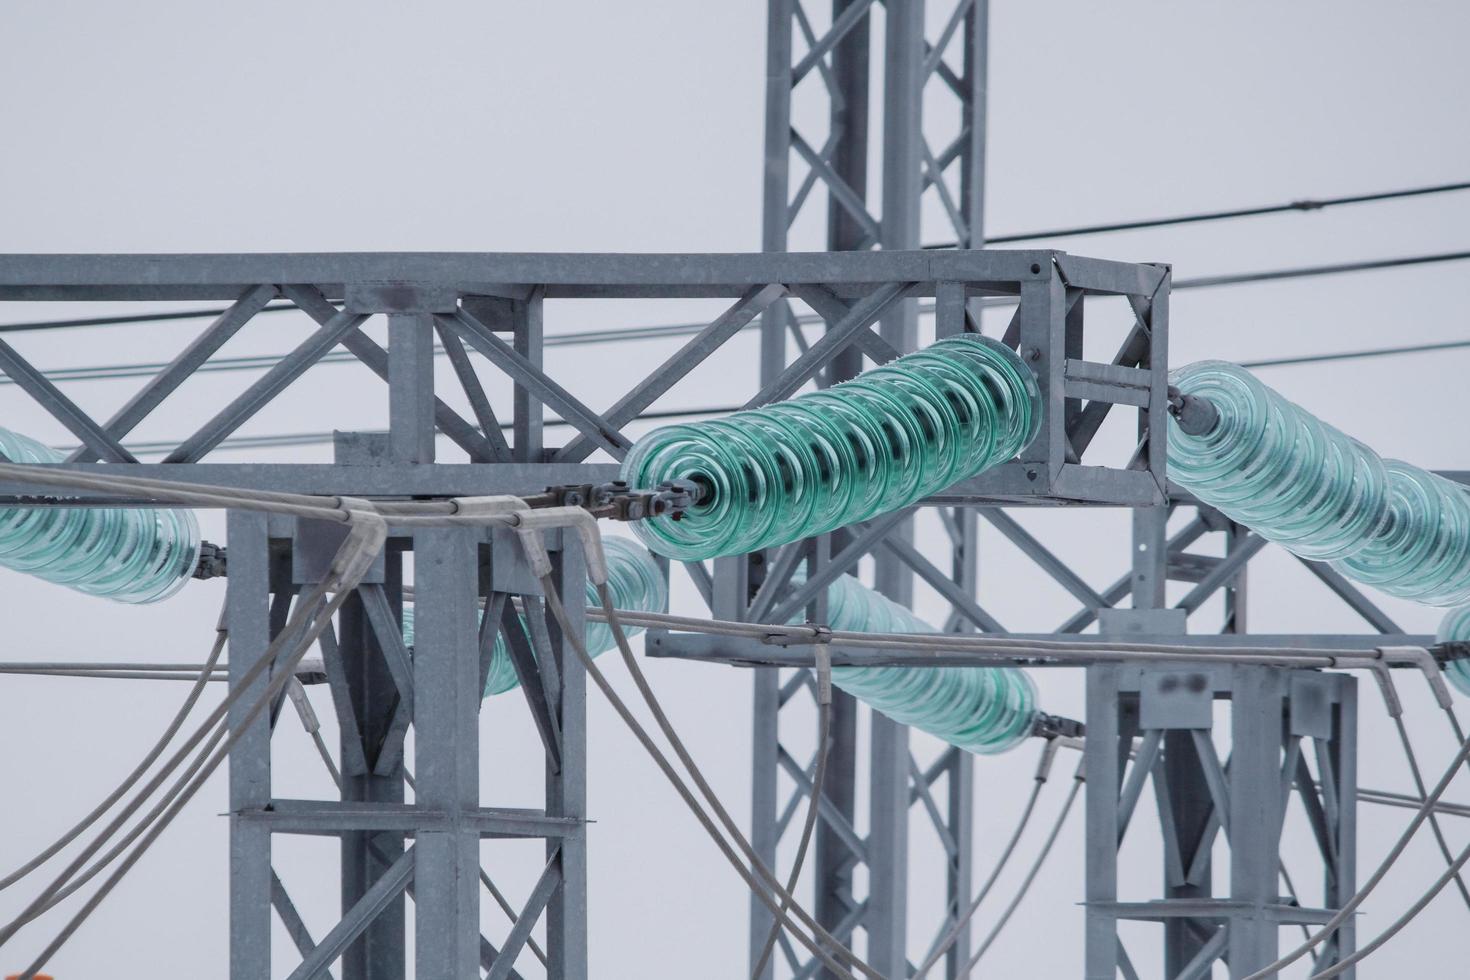 High-voltage line insulators at an electrical substation. Electric power elements of urban infrastructure. photo